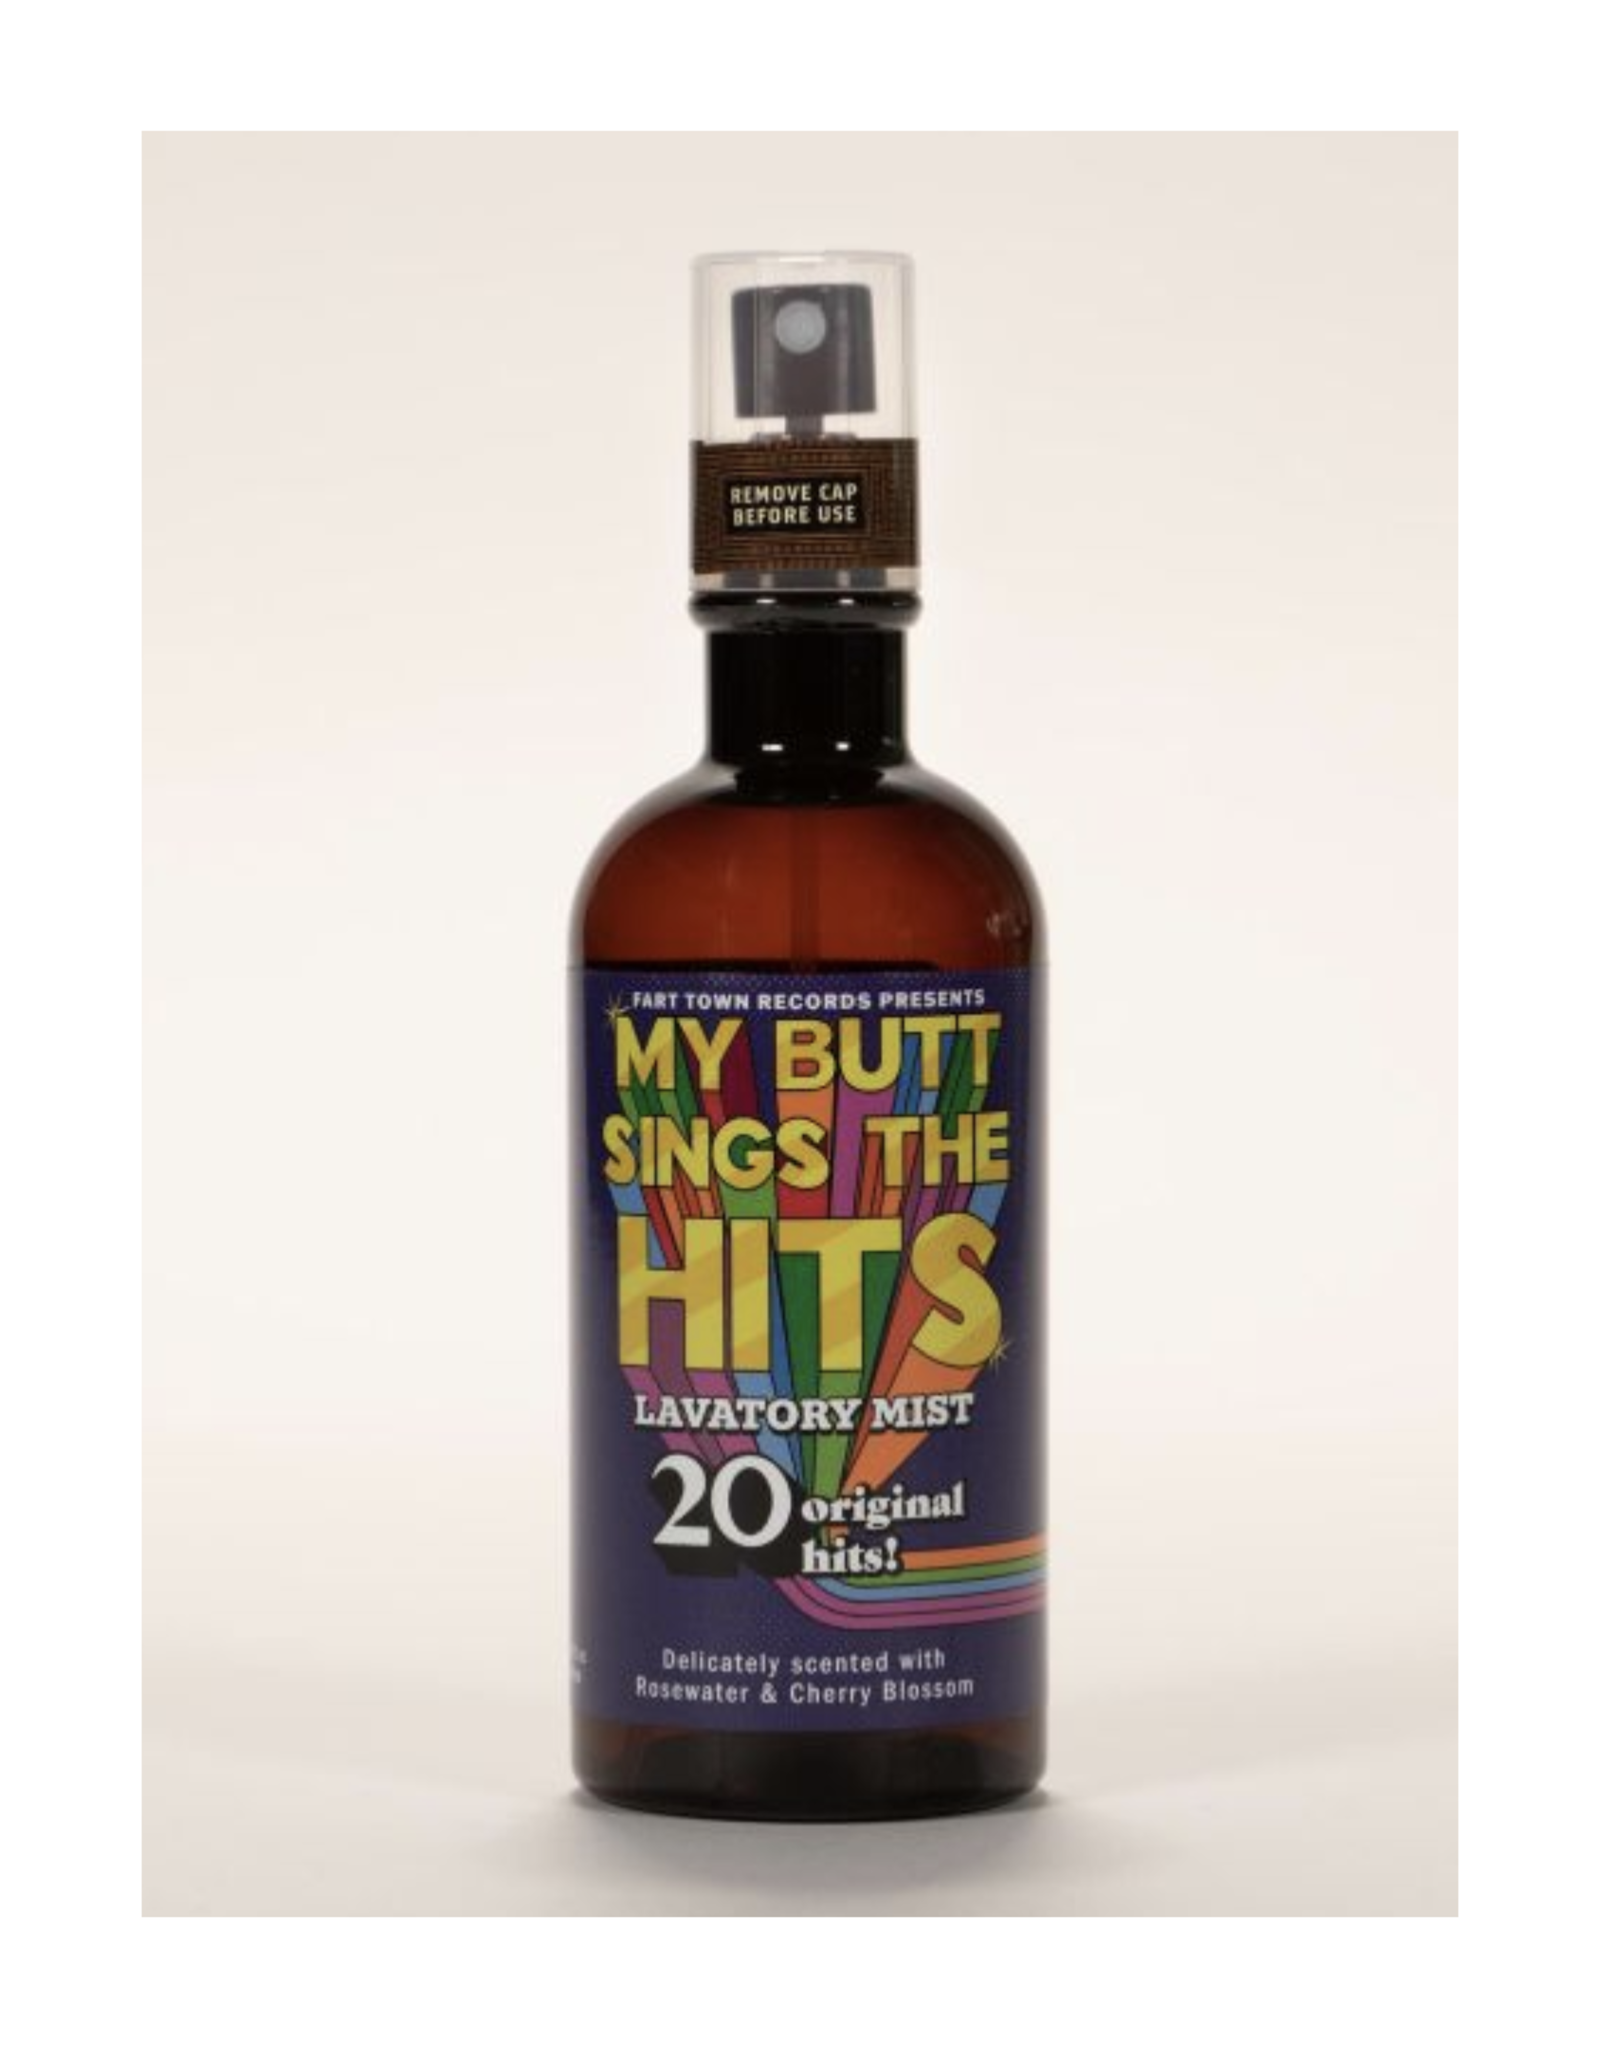 My Butt Sings the Hits Lavatory Mist